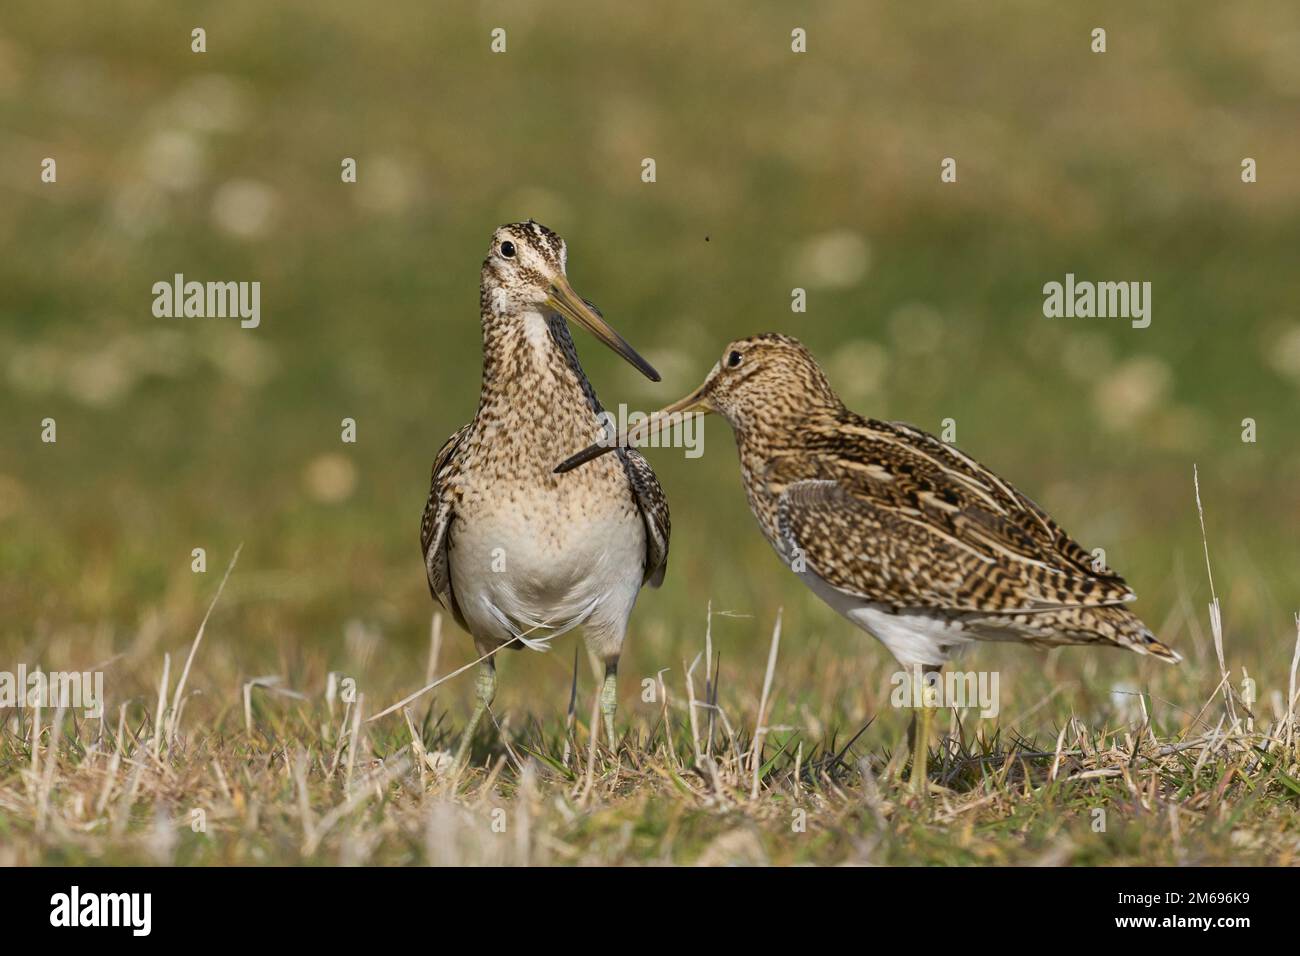 Magellanic Snipe (Gallinago paraguaiae magellanica) interacting during the spring breeding season on Carcass Island in the Falkland Islands. Stock Photo